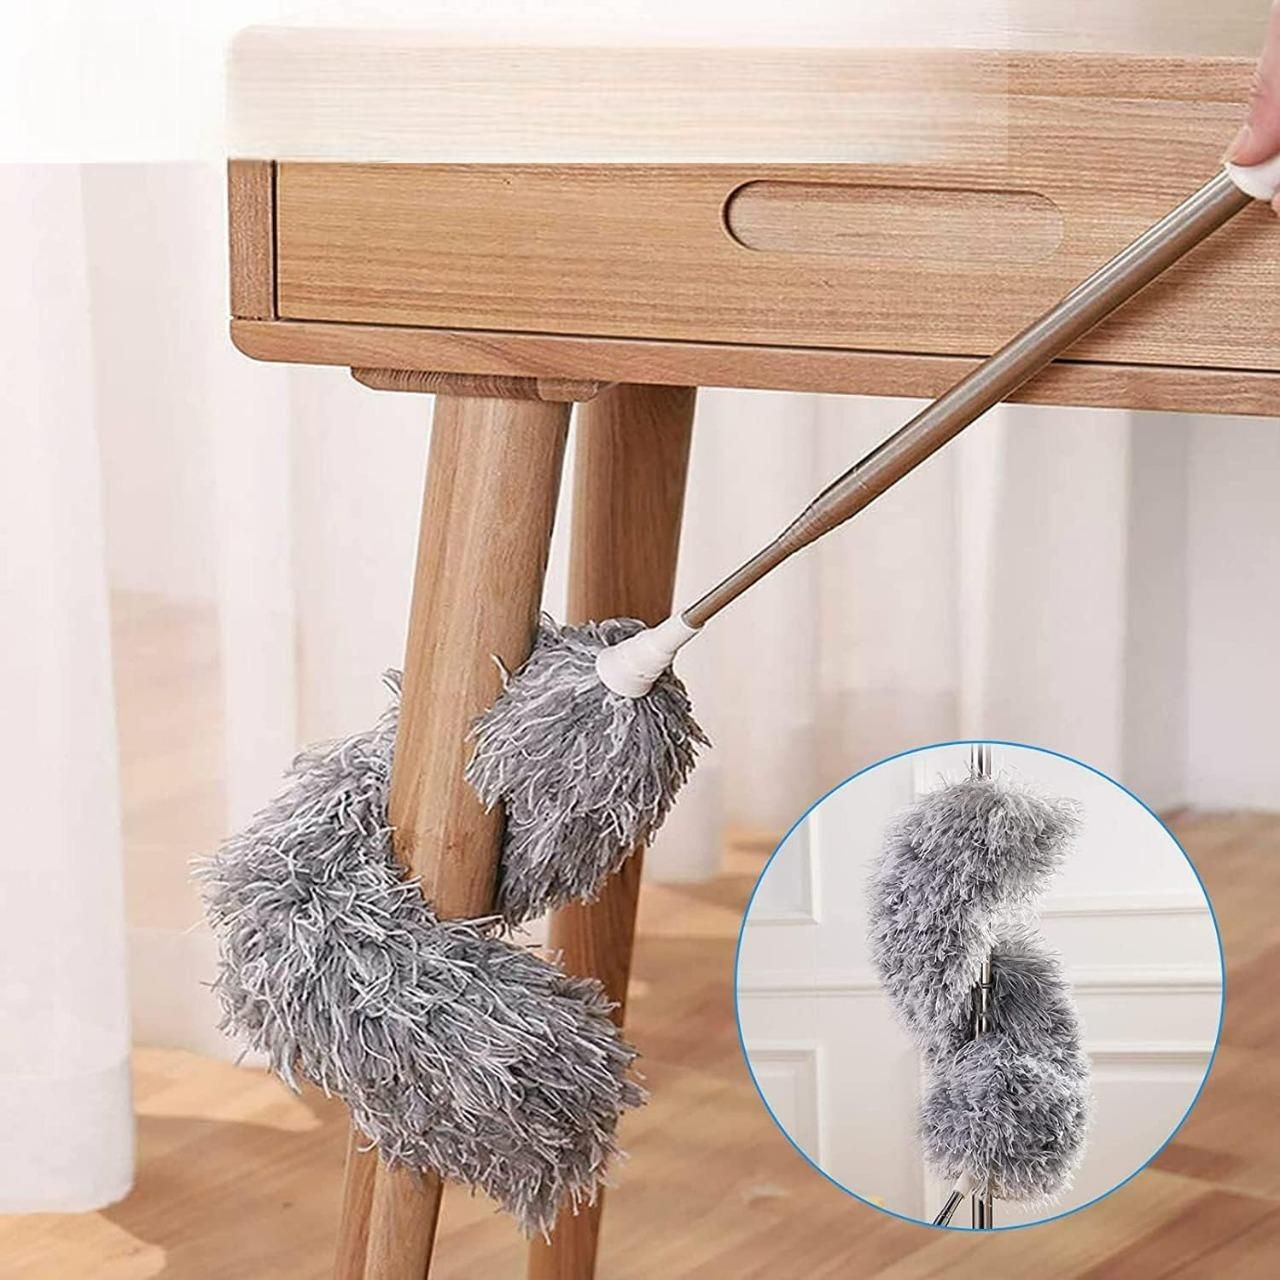 Flexible Mop for Quick and Easy Cleaning